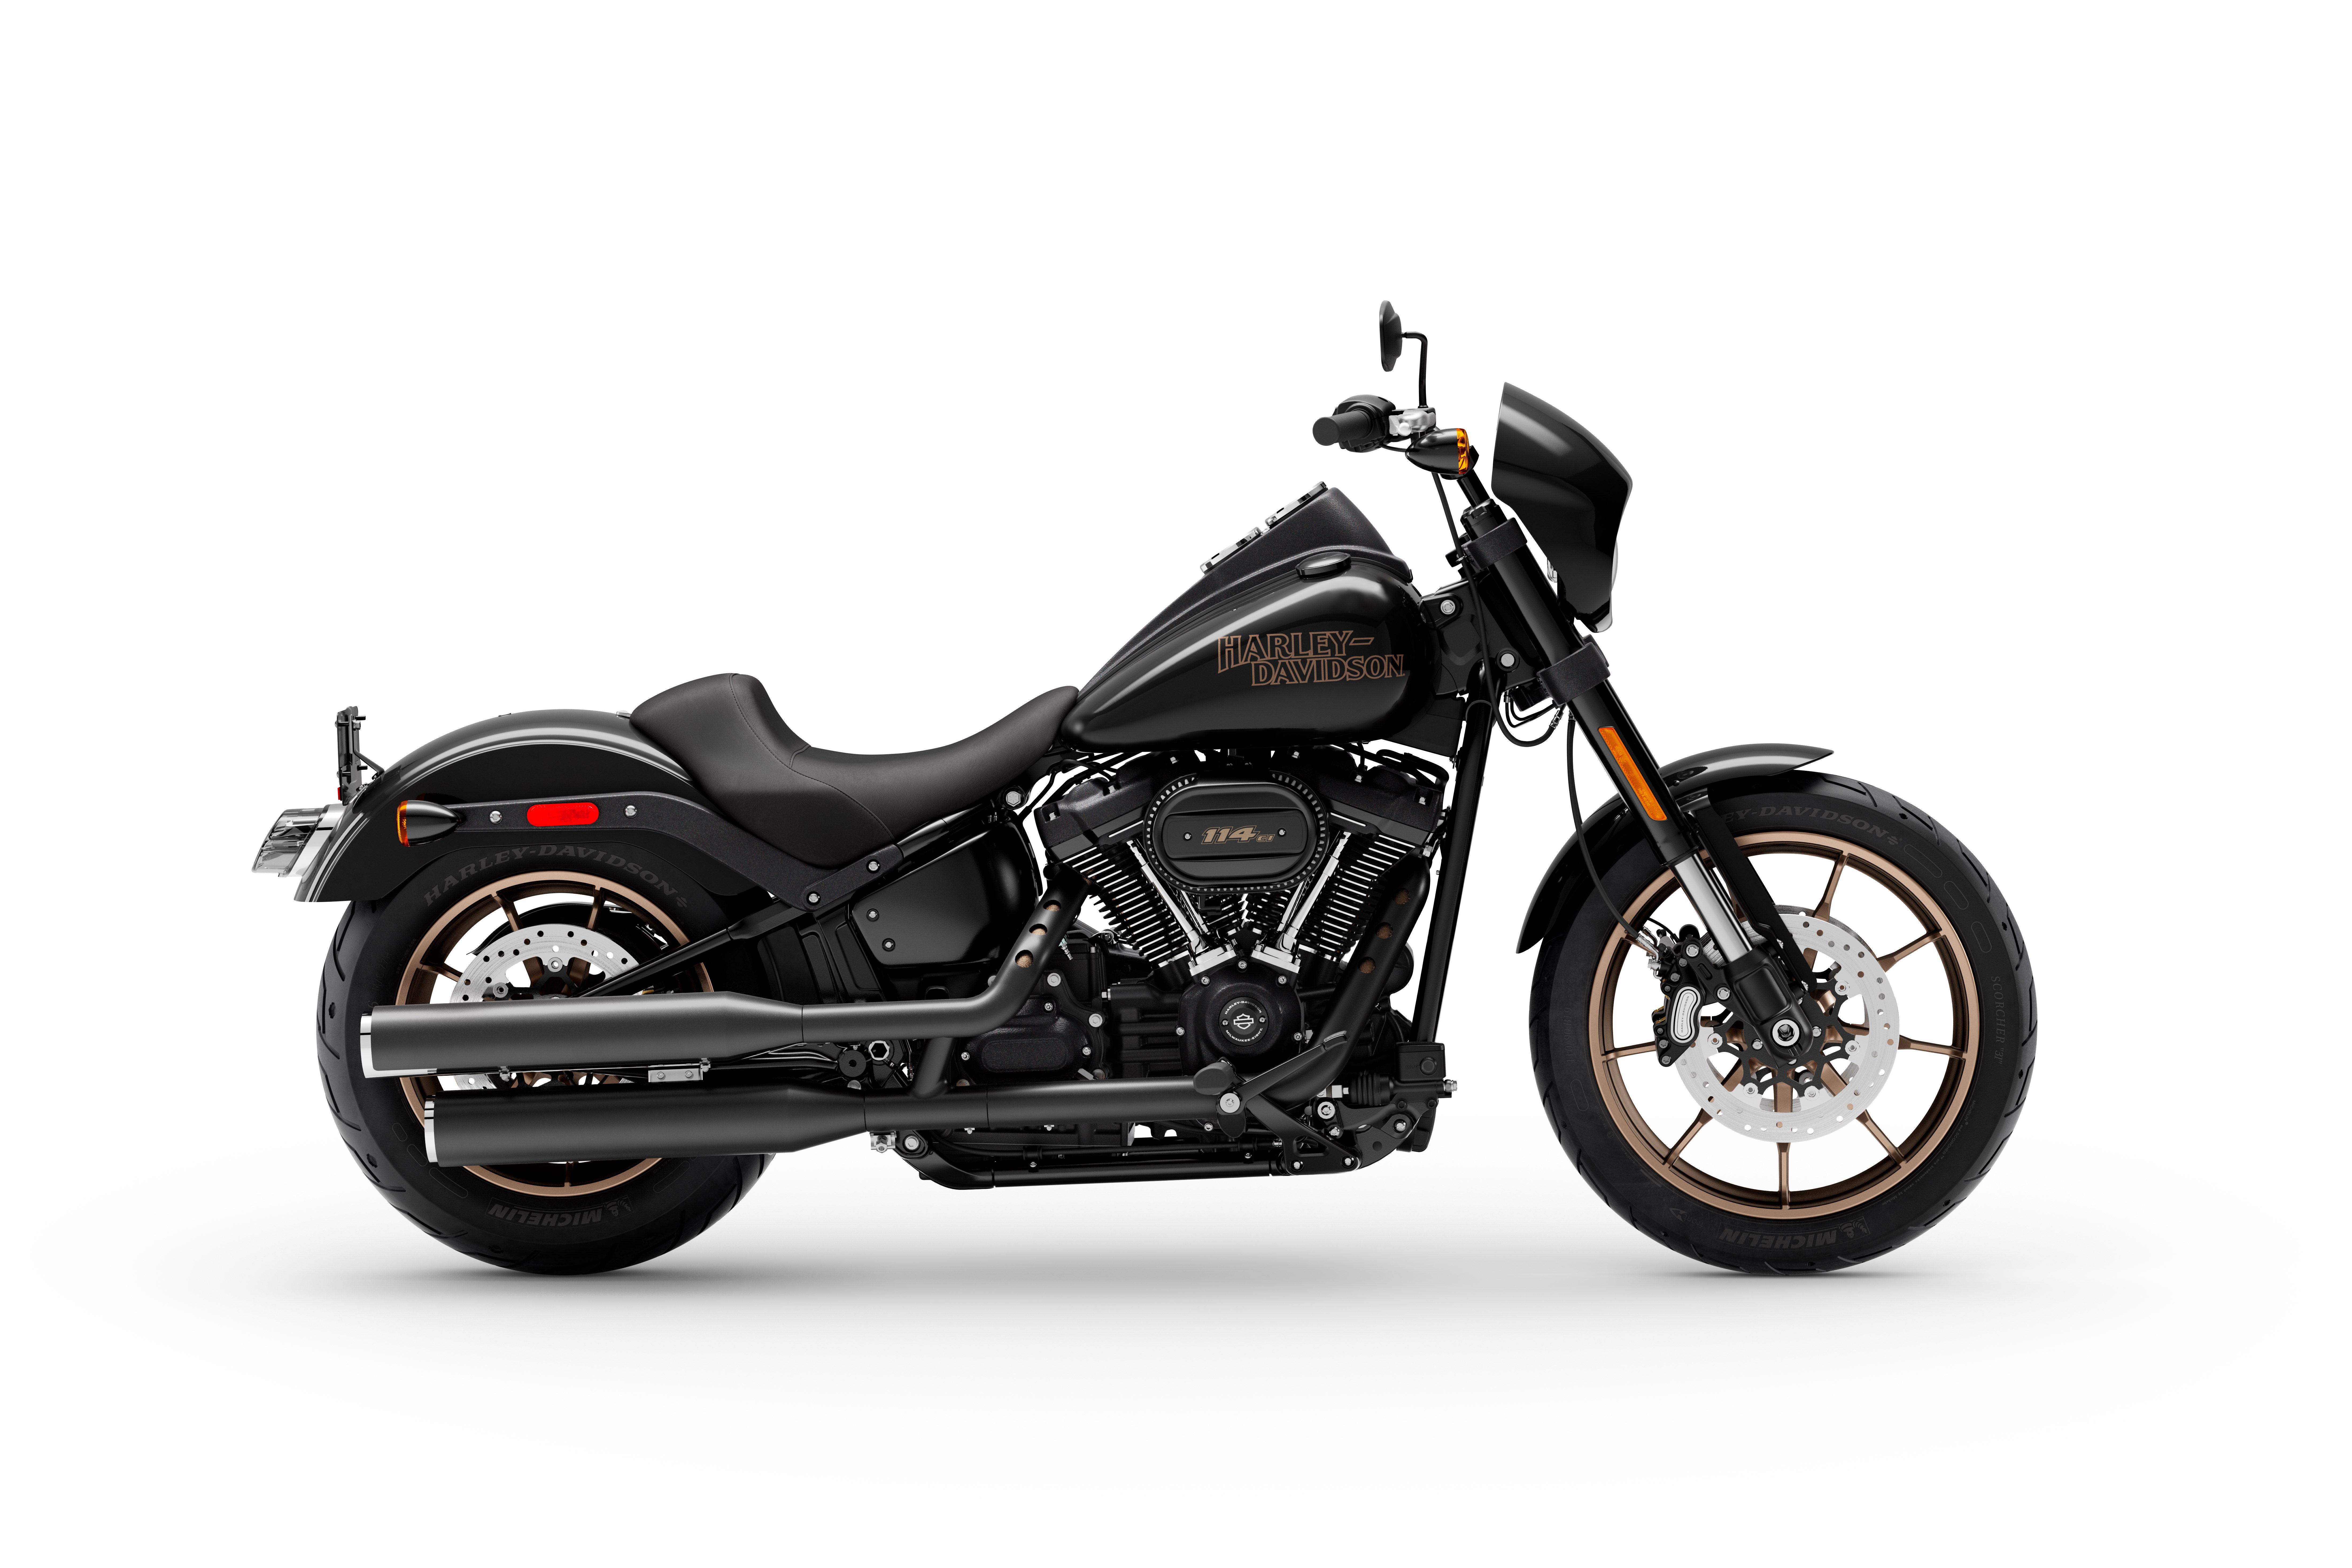 3 New Harley Davidson Low Rider S In Stock Serving Carson City Sparks Lake Tahoe Nv